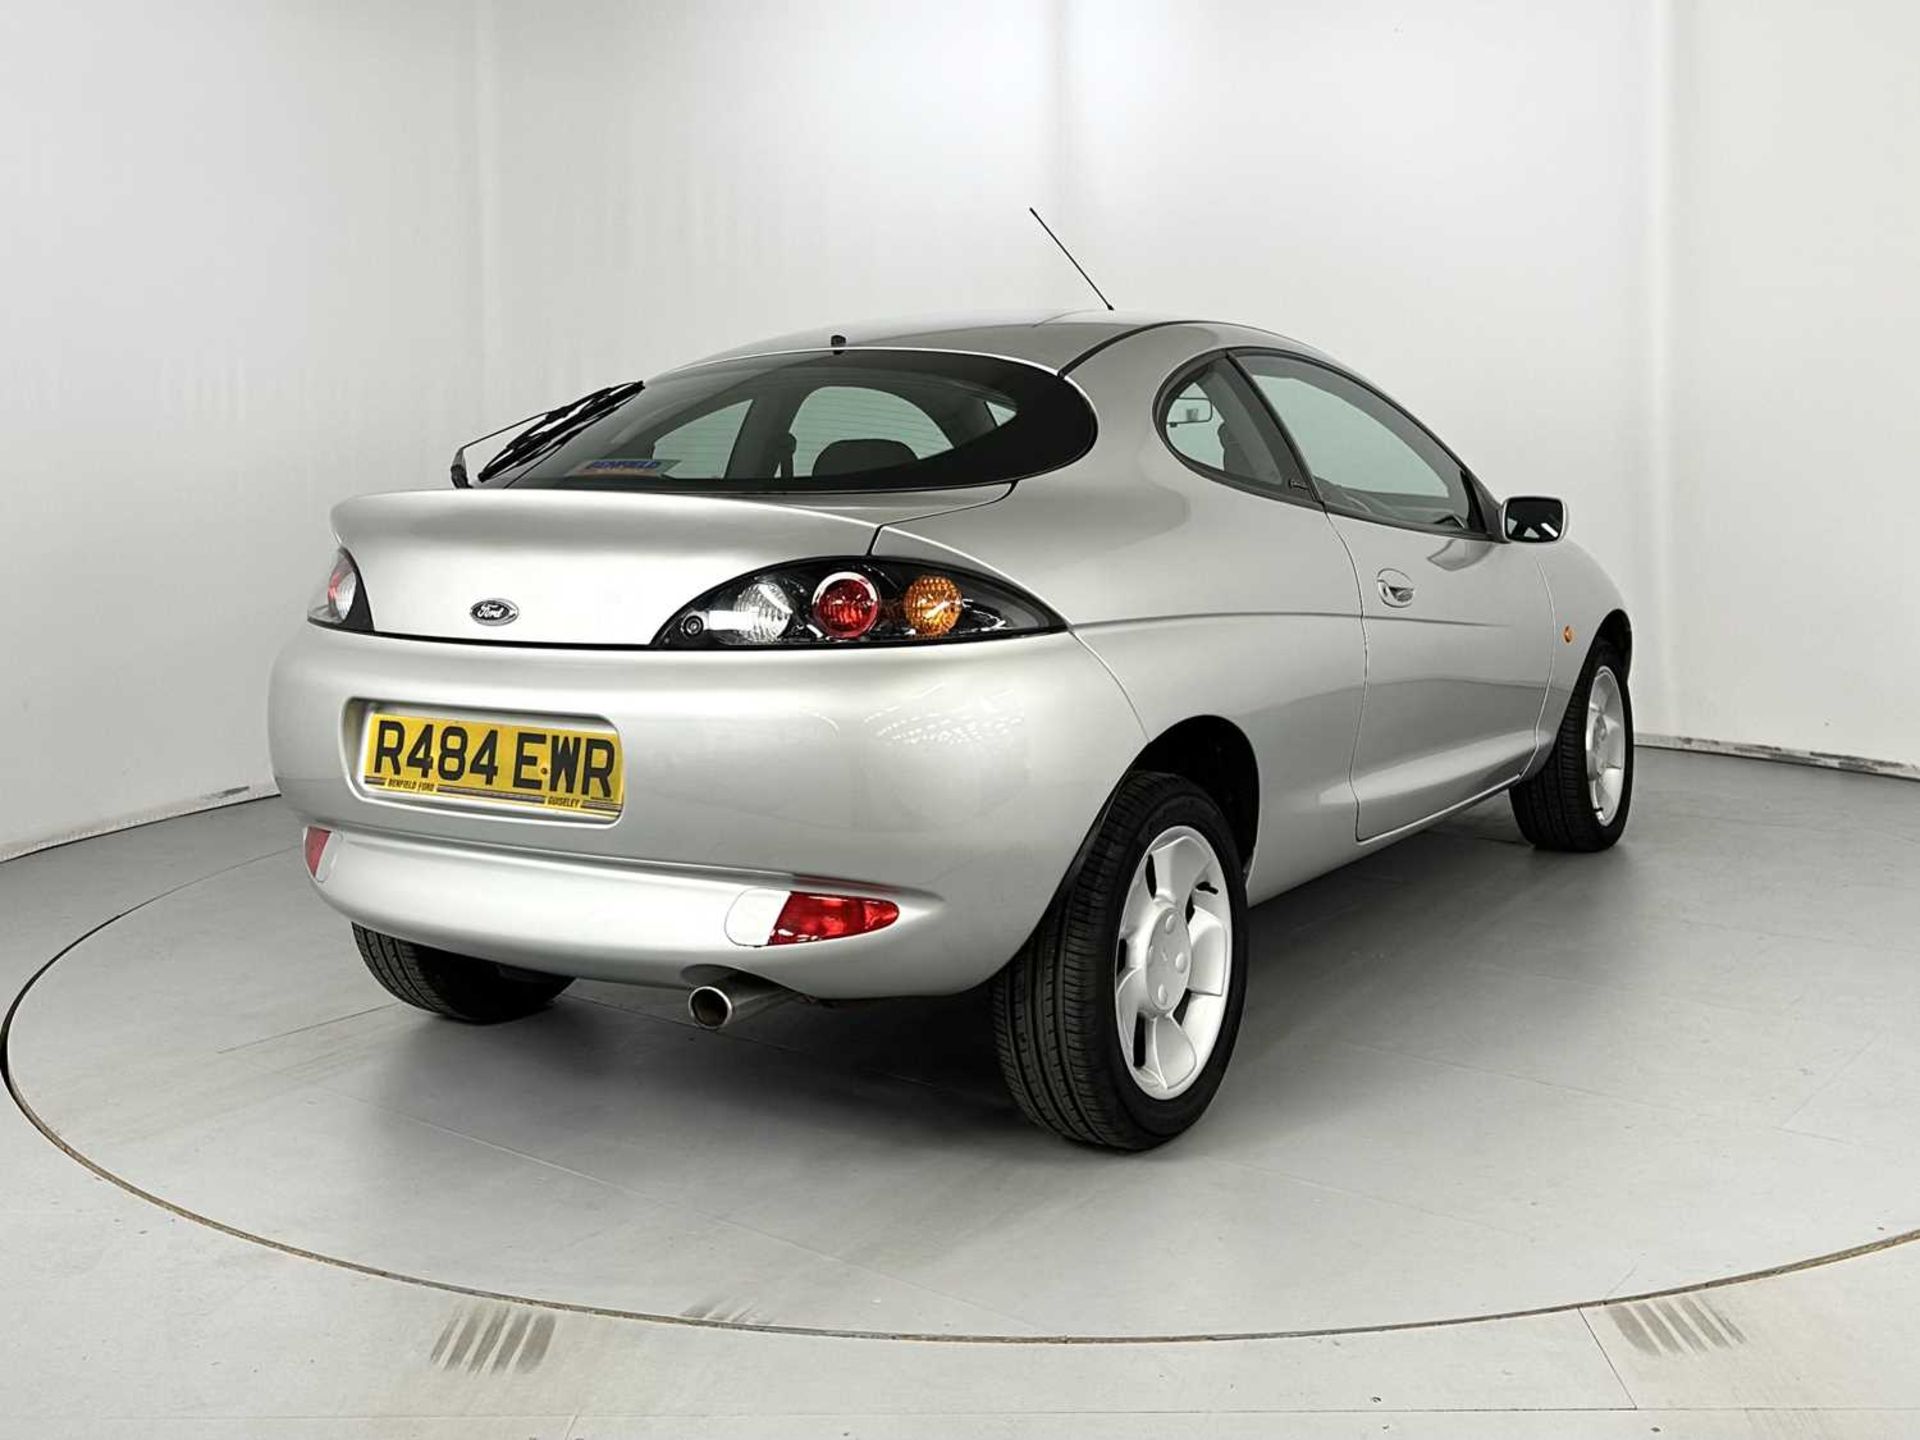 1997 Ford Puma Only 9,000 miles from new! - Image 9 of 30